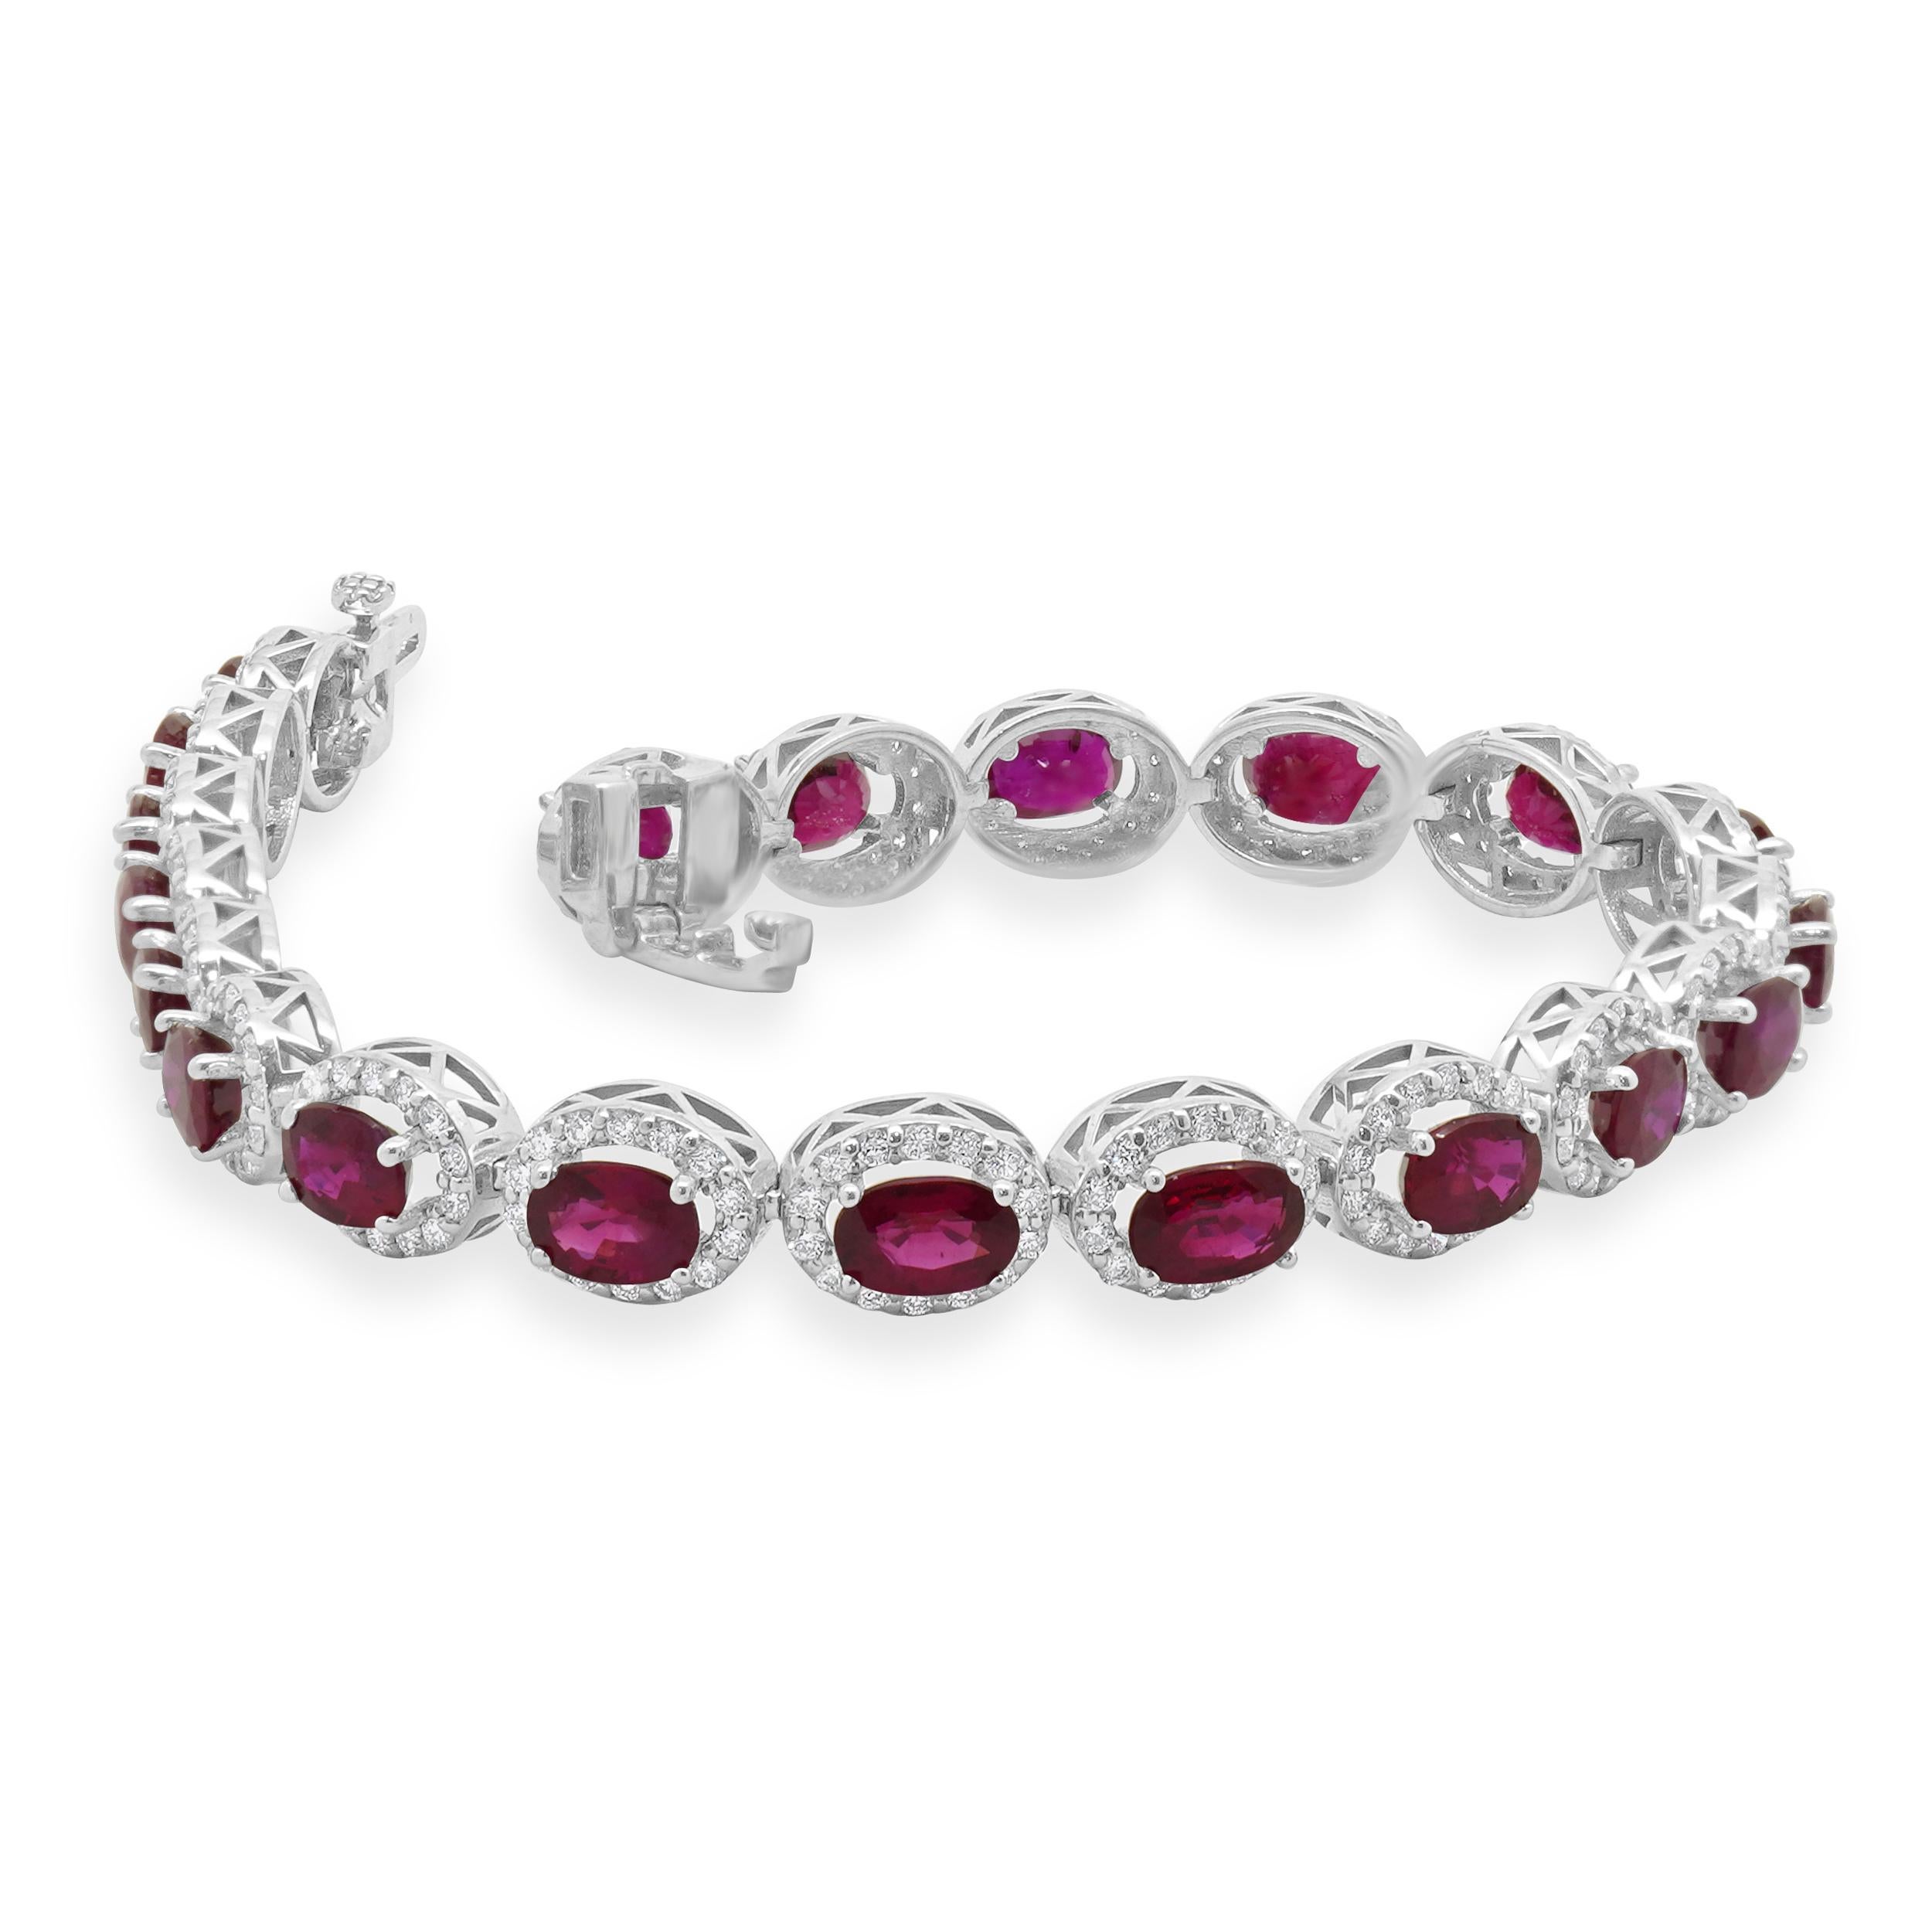 14 Karat White Gold Ruby and Diamond Halo Link Bracelet In Excellent Condition For Sale In Scottsdale, AZ